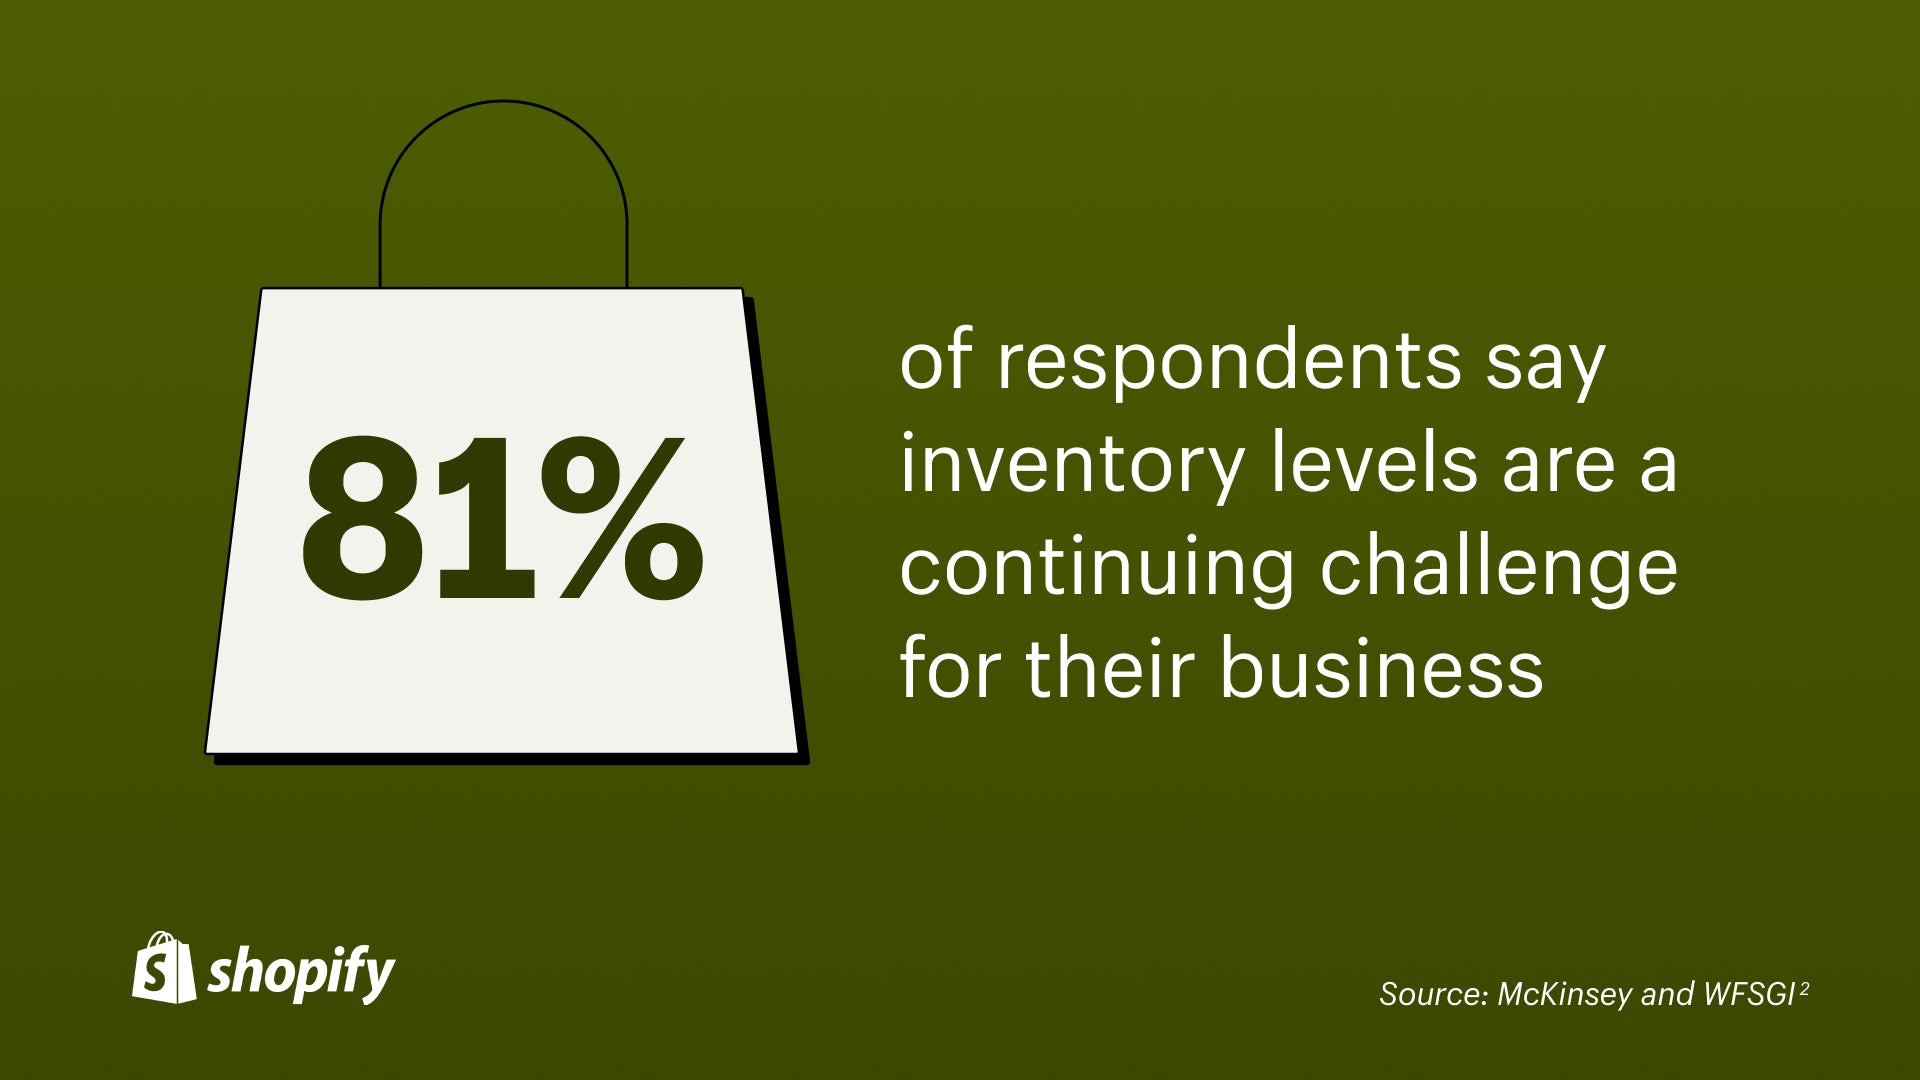 Green background with a white cartoon shopping bag and a fact that states, '81% of respondents say inventory levels are a continuing challenge for their business.'